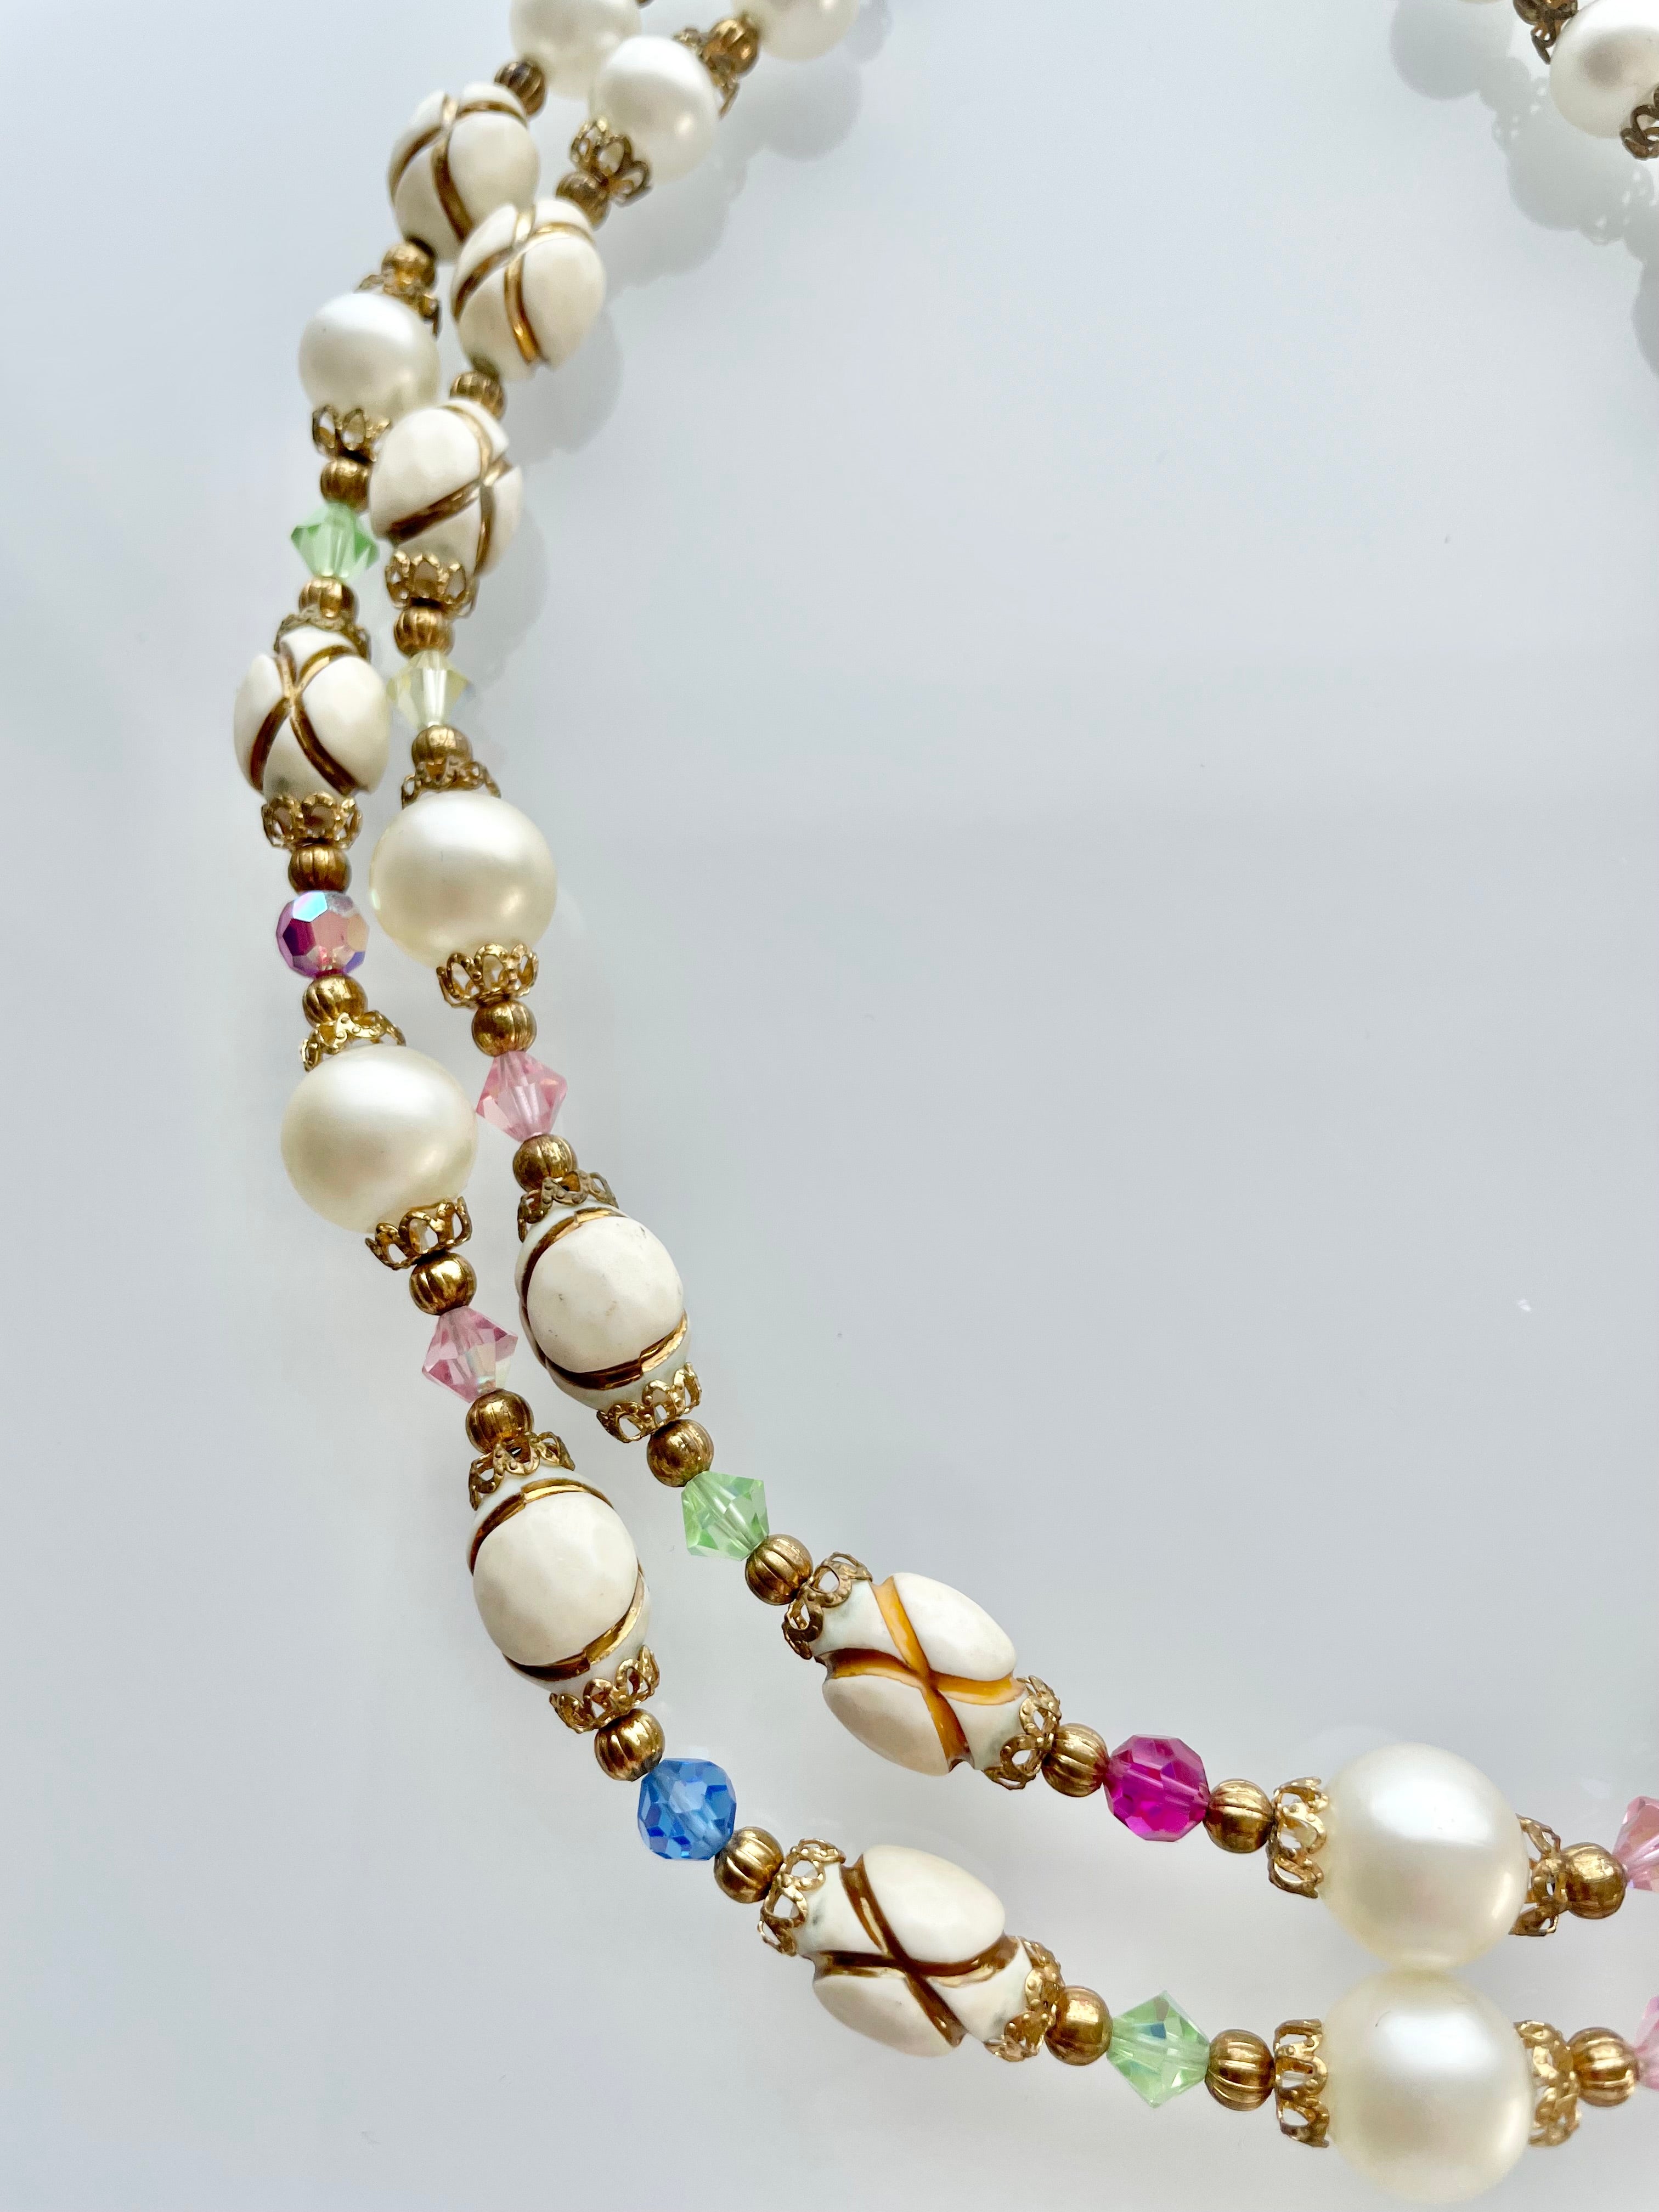 Isn't she charming... this lady loves a classic pearl necklace with a twist! Truly lovely....